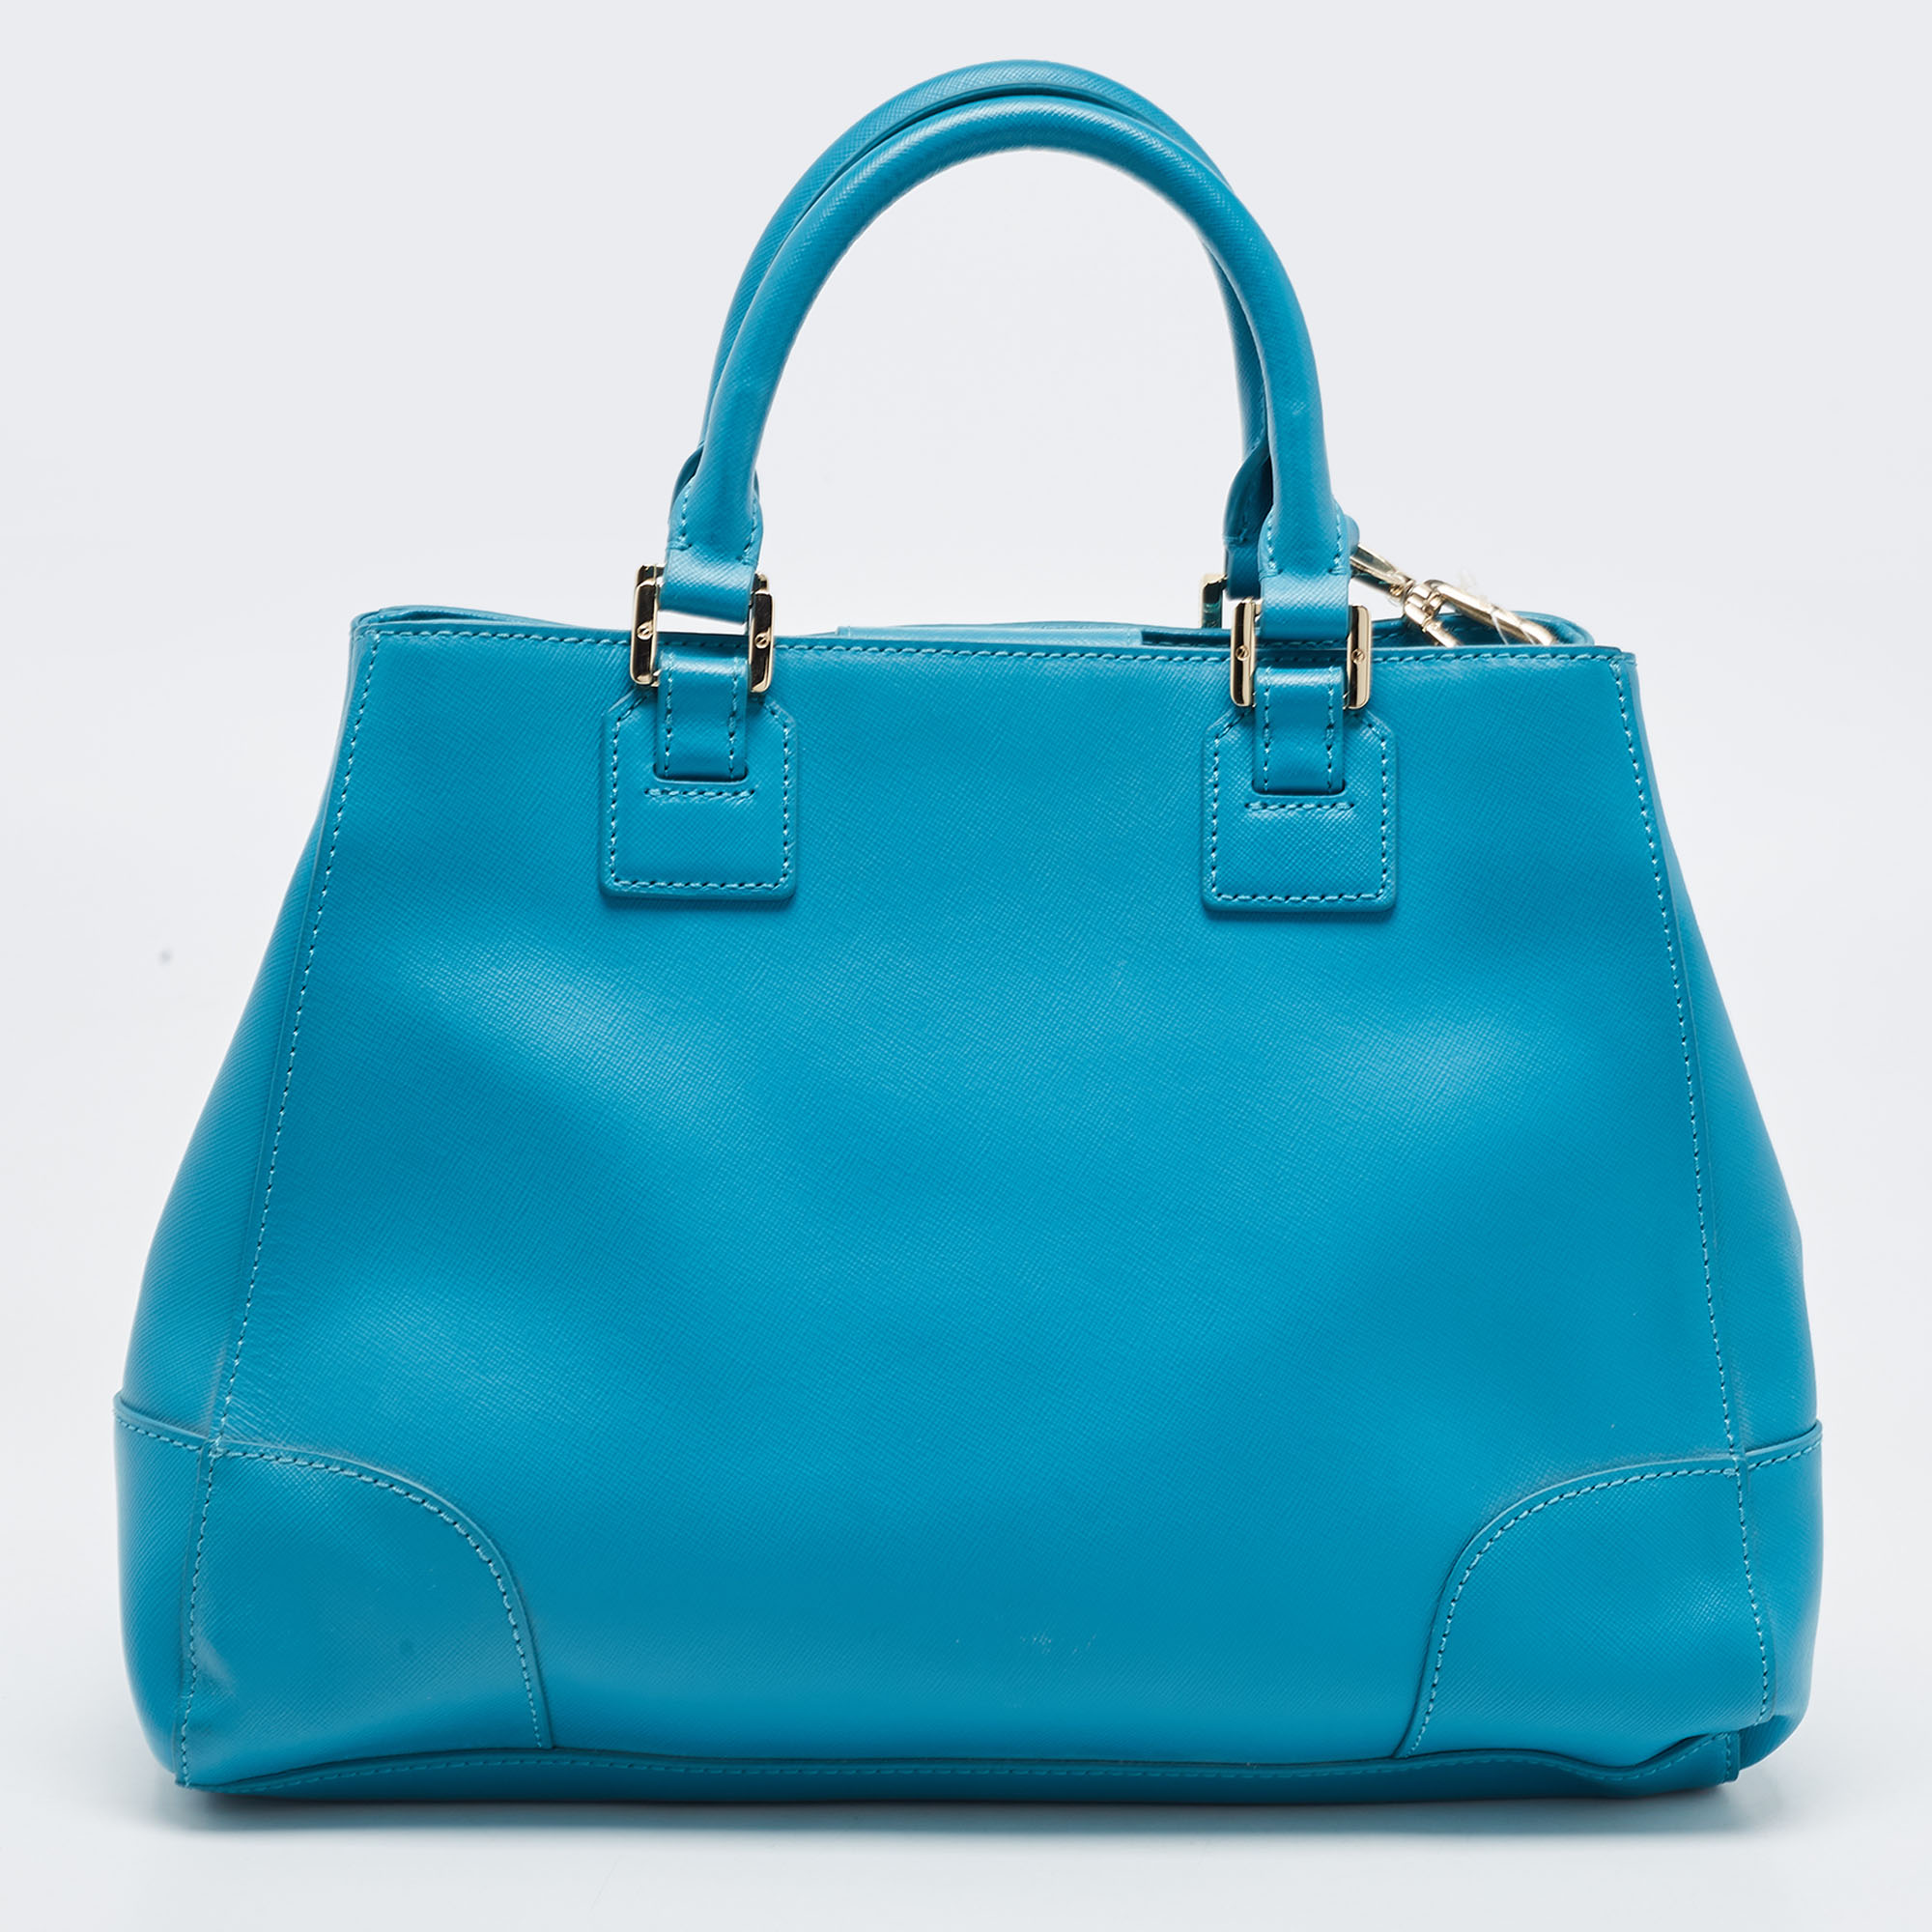 Tory Burch Teal Blue Saffiano Leather Robinson Tote